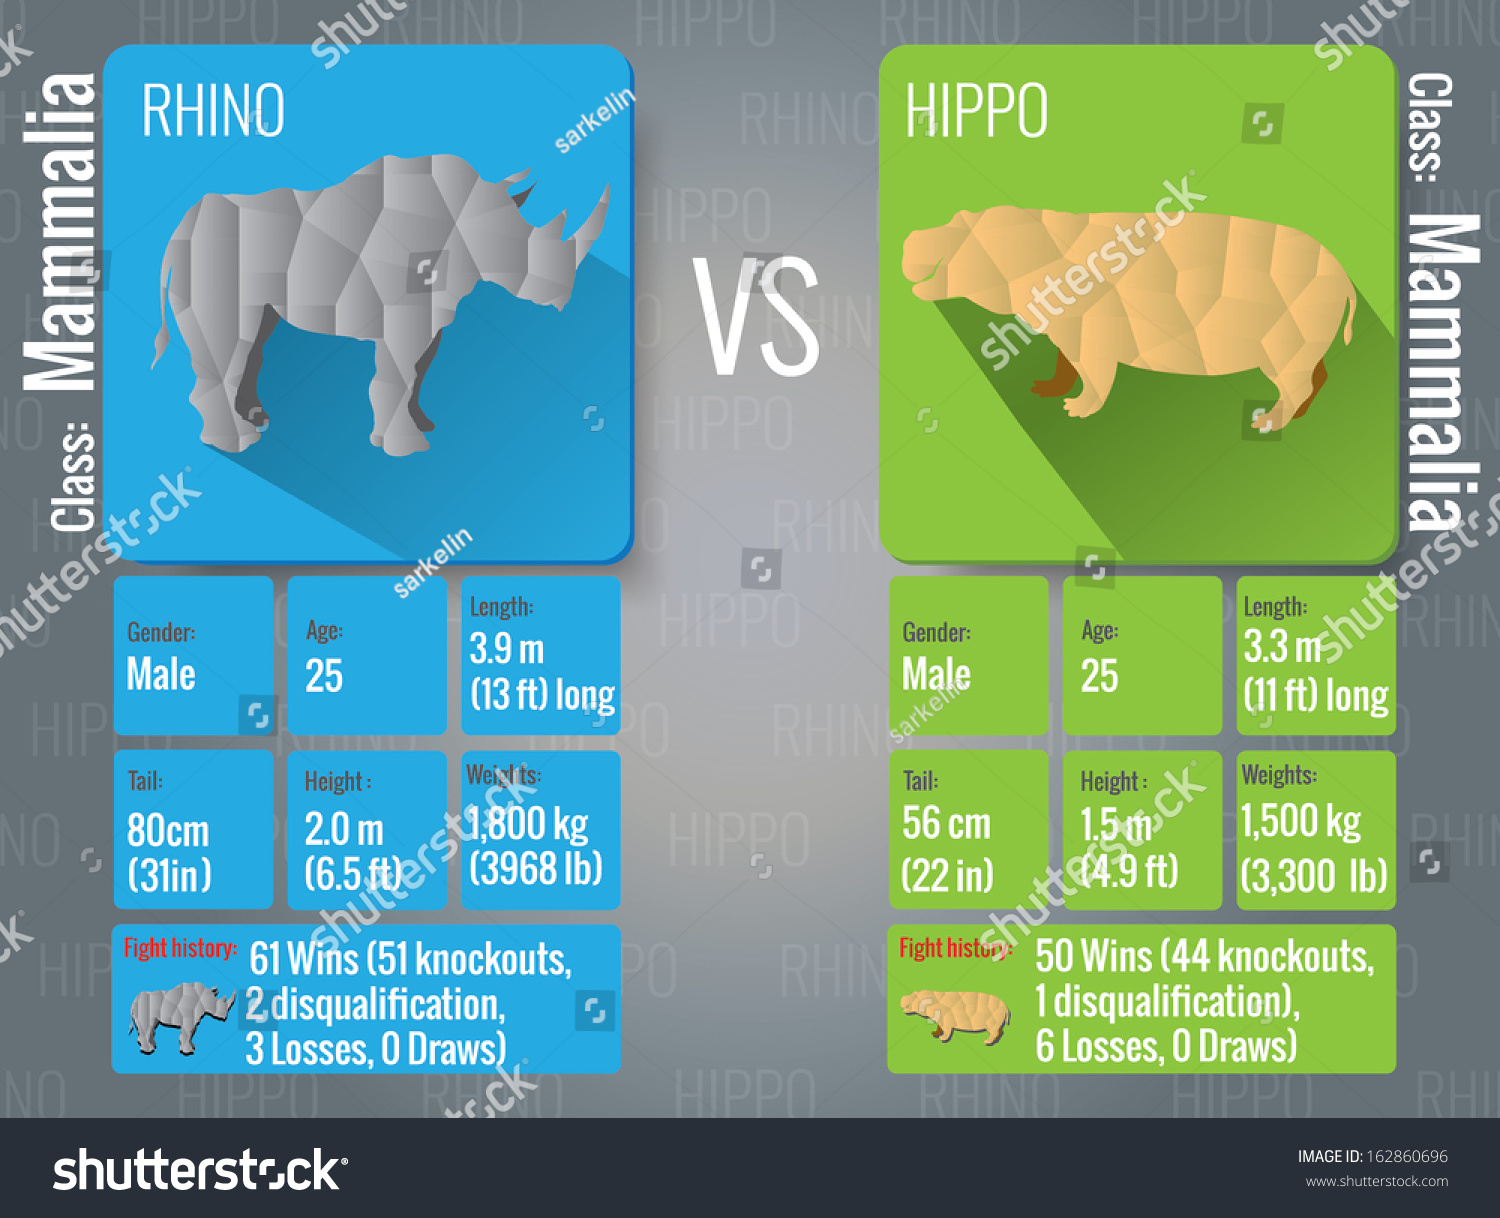 Who wins in a hippo versus elephant fight?